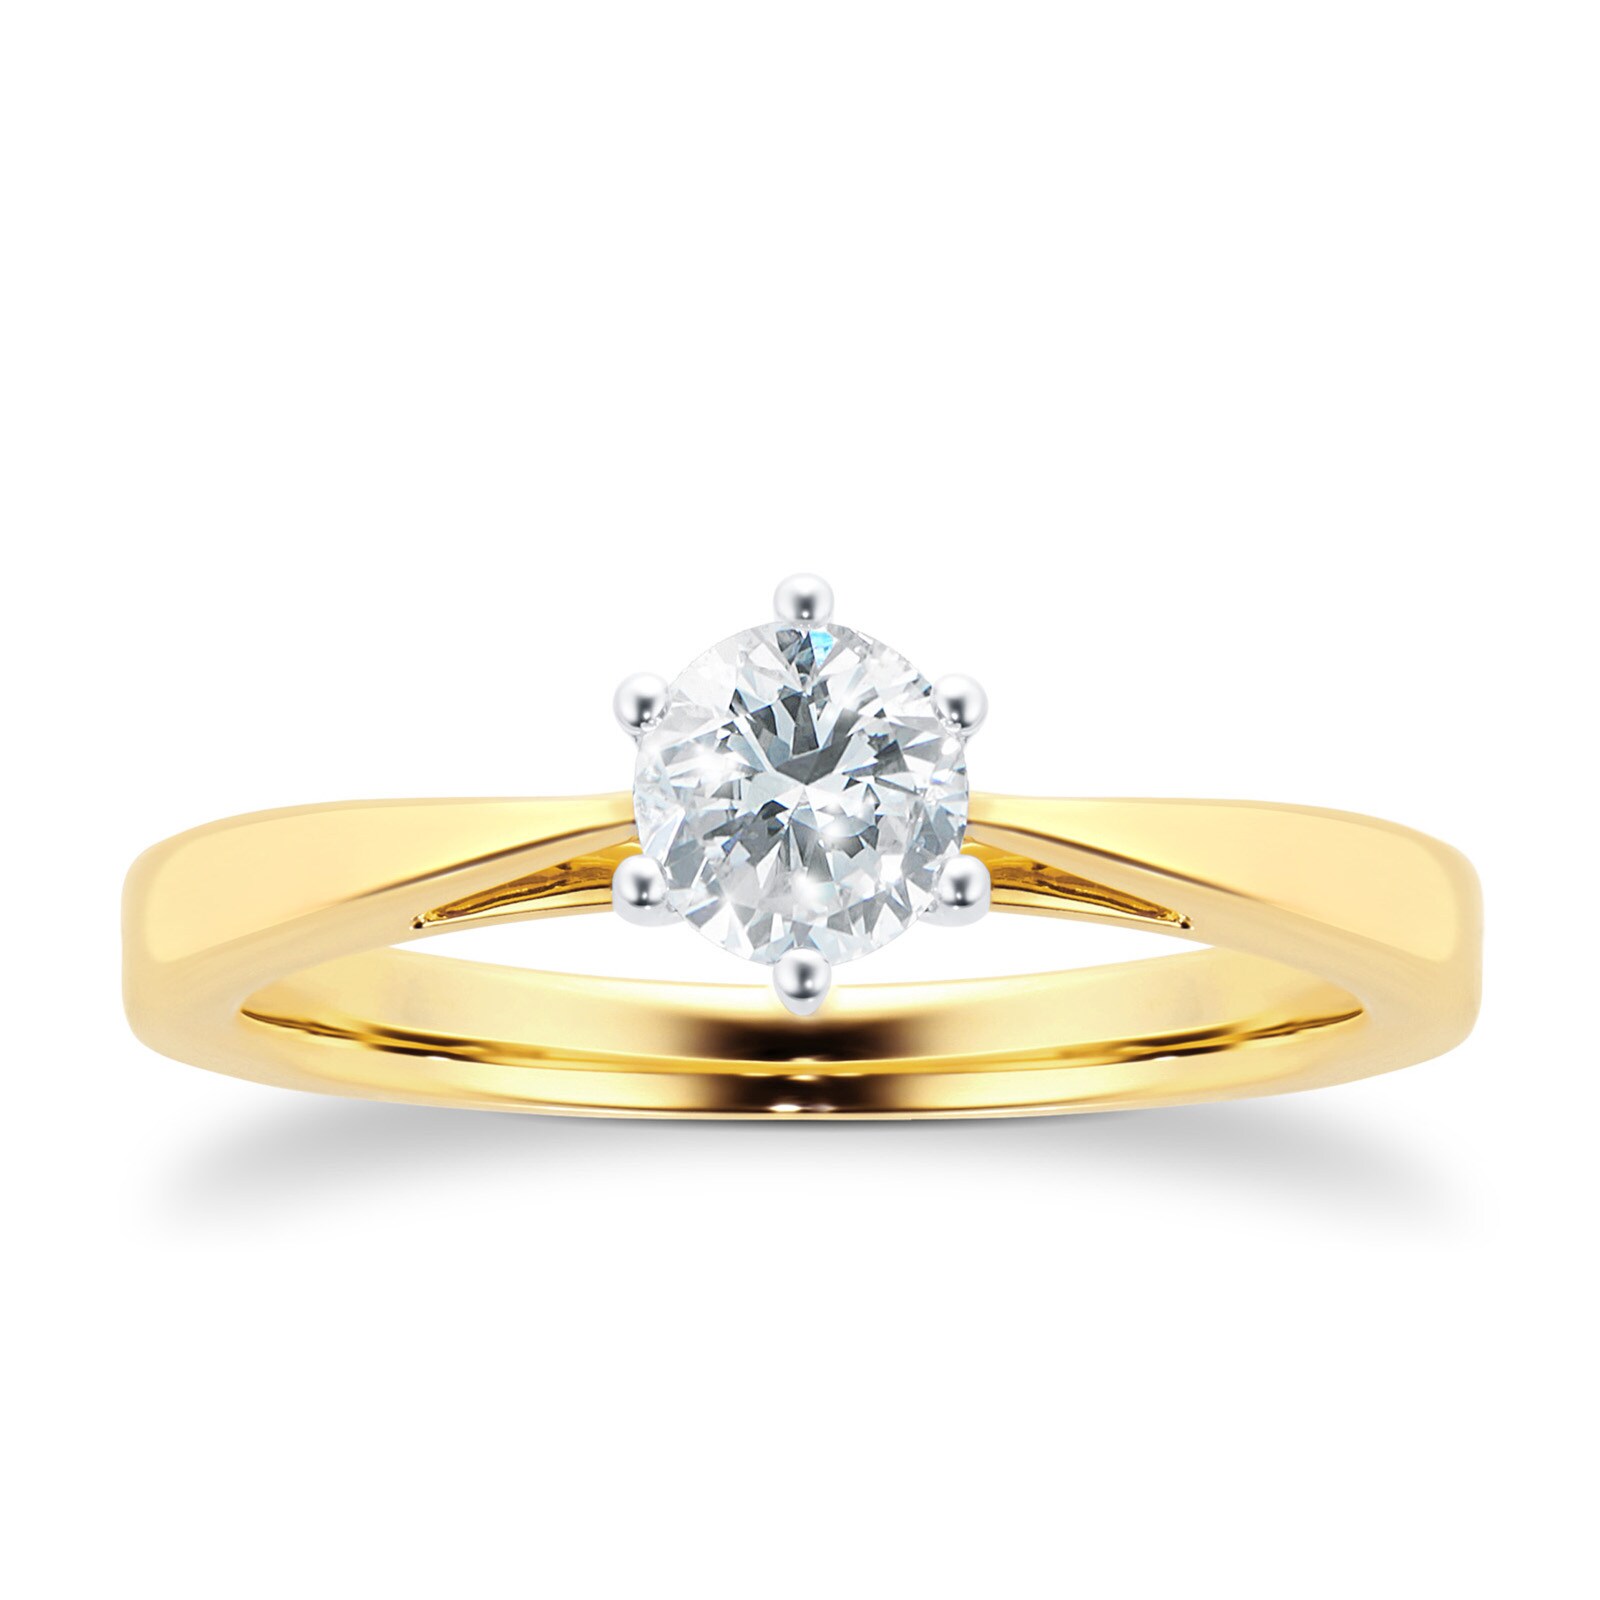 18ct Yellow Gold 0.40ct Diamond 6 Claw Solitaire Ring